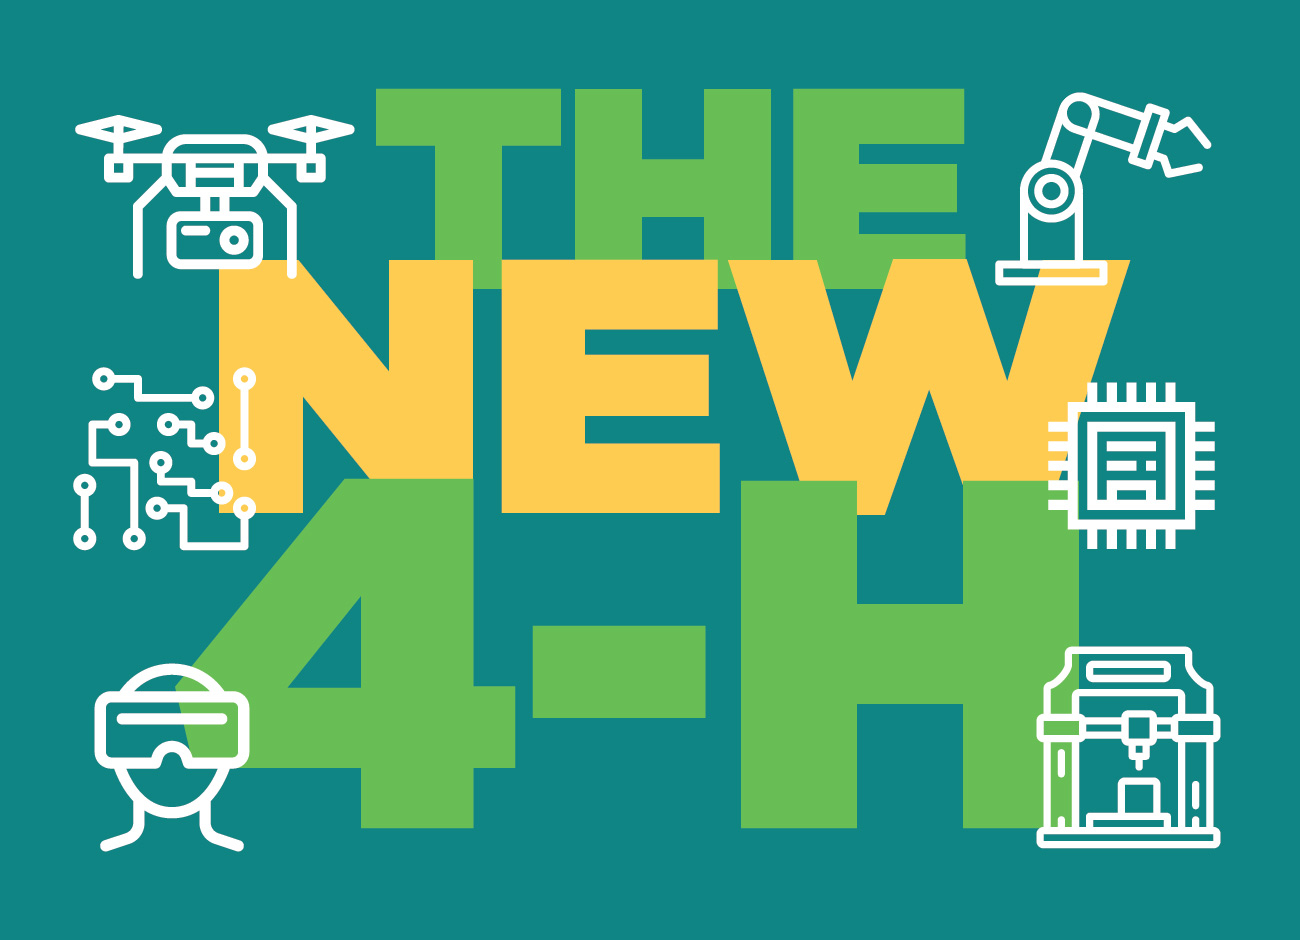 text reading "The New 4-H" with six icons of drones, computer chips, VCR goggles, and microscopes along the edges